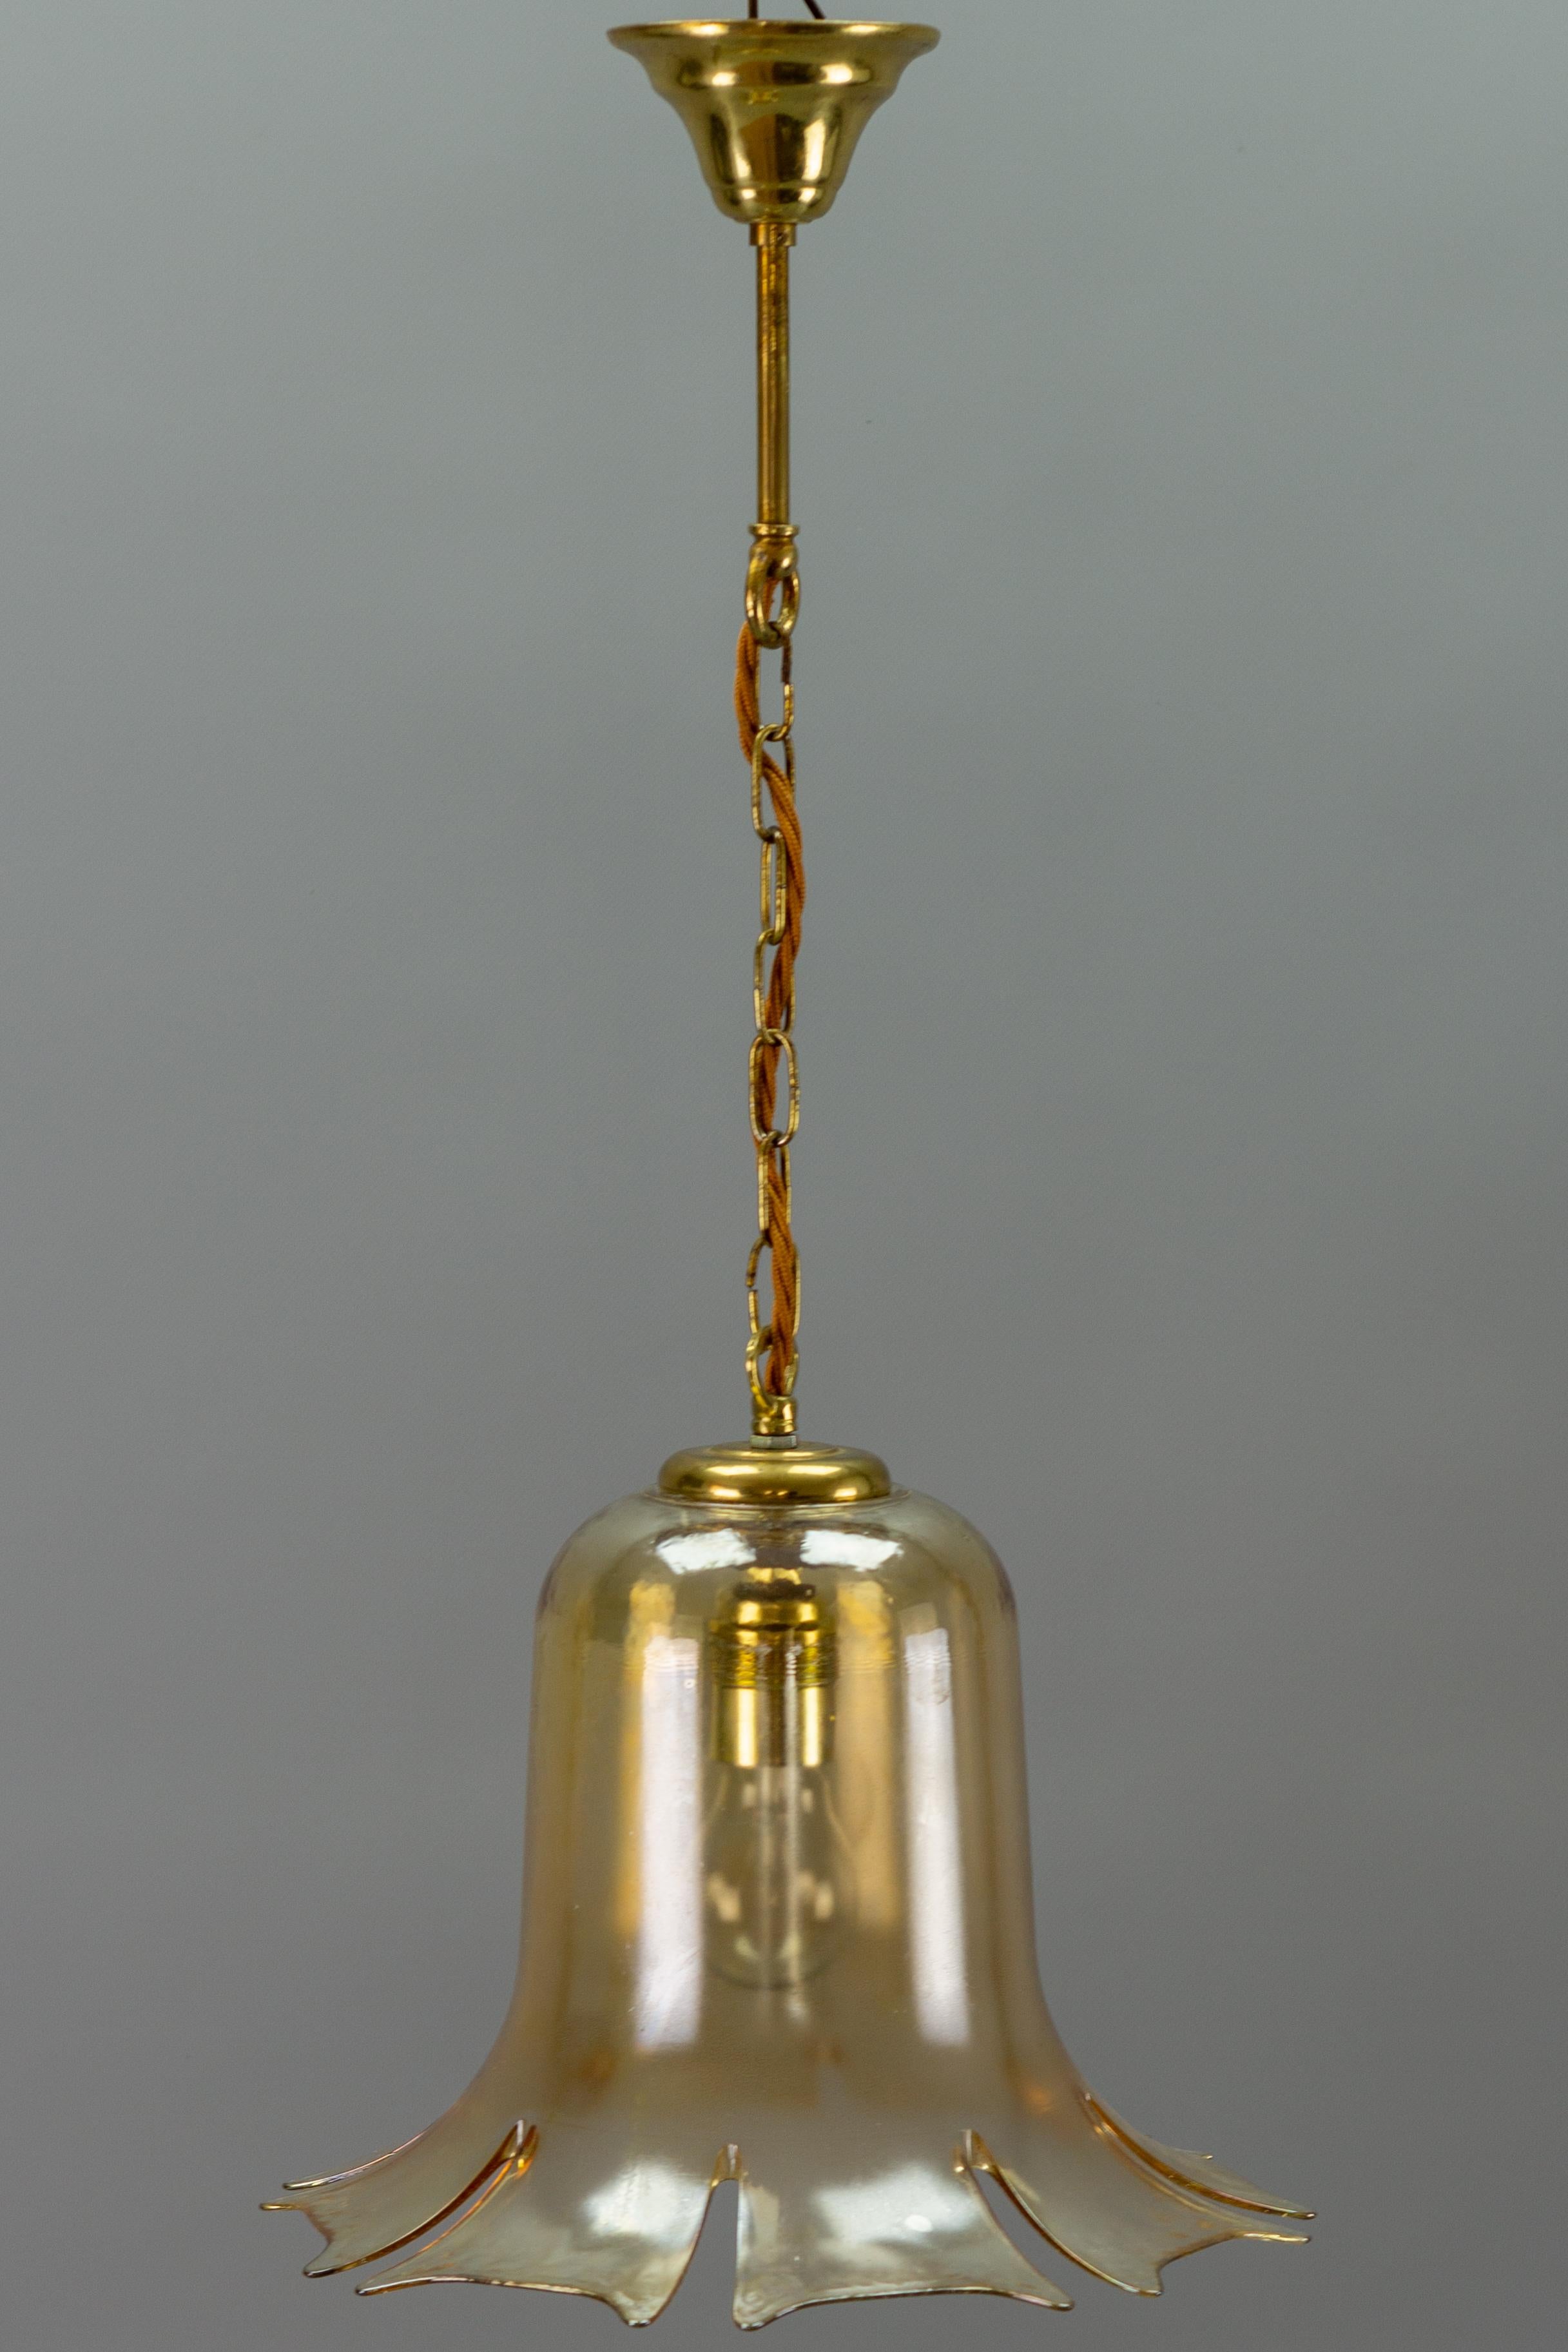 Vintage mid-century bell-shaped amber color transparent glass single light pendant lamp, Denmark, 1960s.
Dimensions: height: 63 cm / 24.8 in; diameter: 30 cm / 11.81 in.
One socket for E27 (E26) size light bulb.
The light fixture is in complete